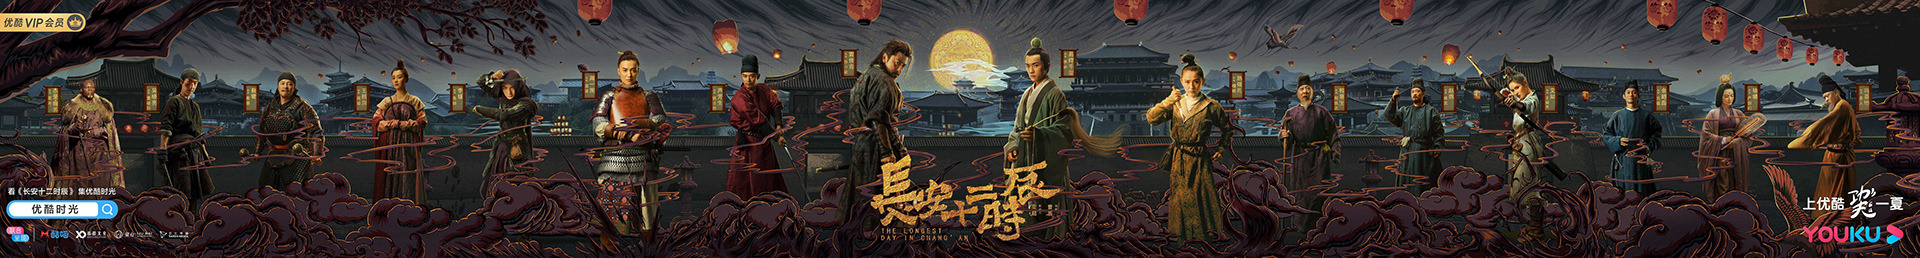 Extra Large TV Poster Image for Chang'an shi er shi chen (#18 of 18)